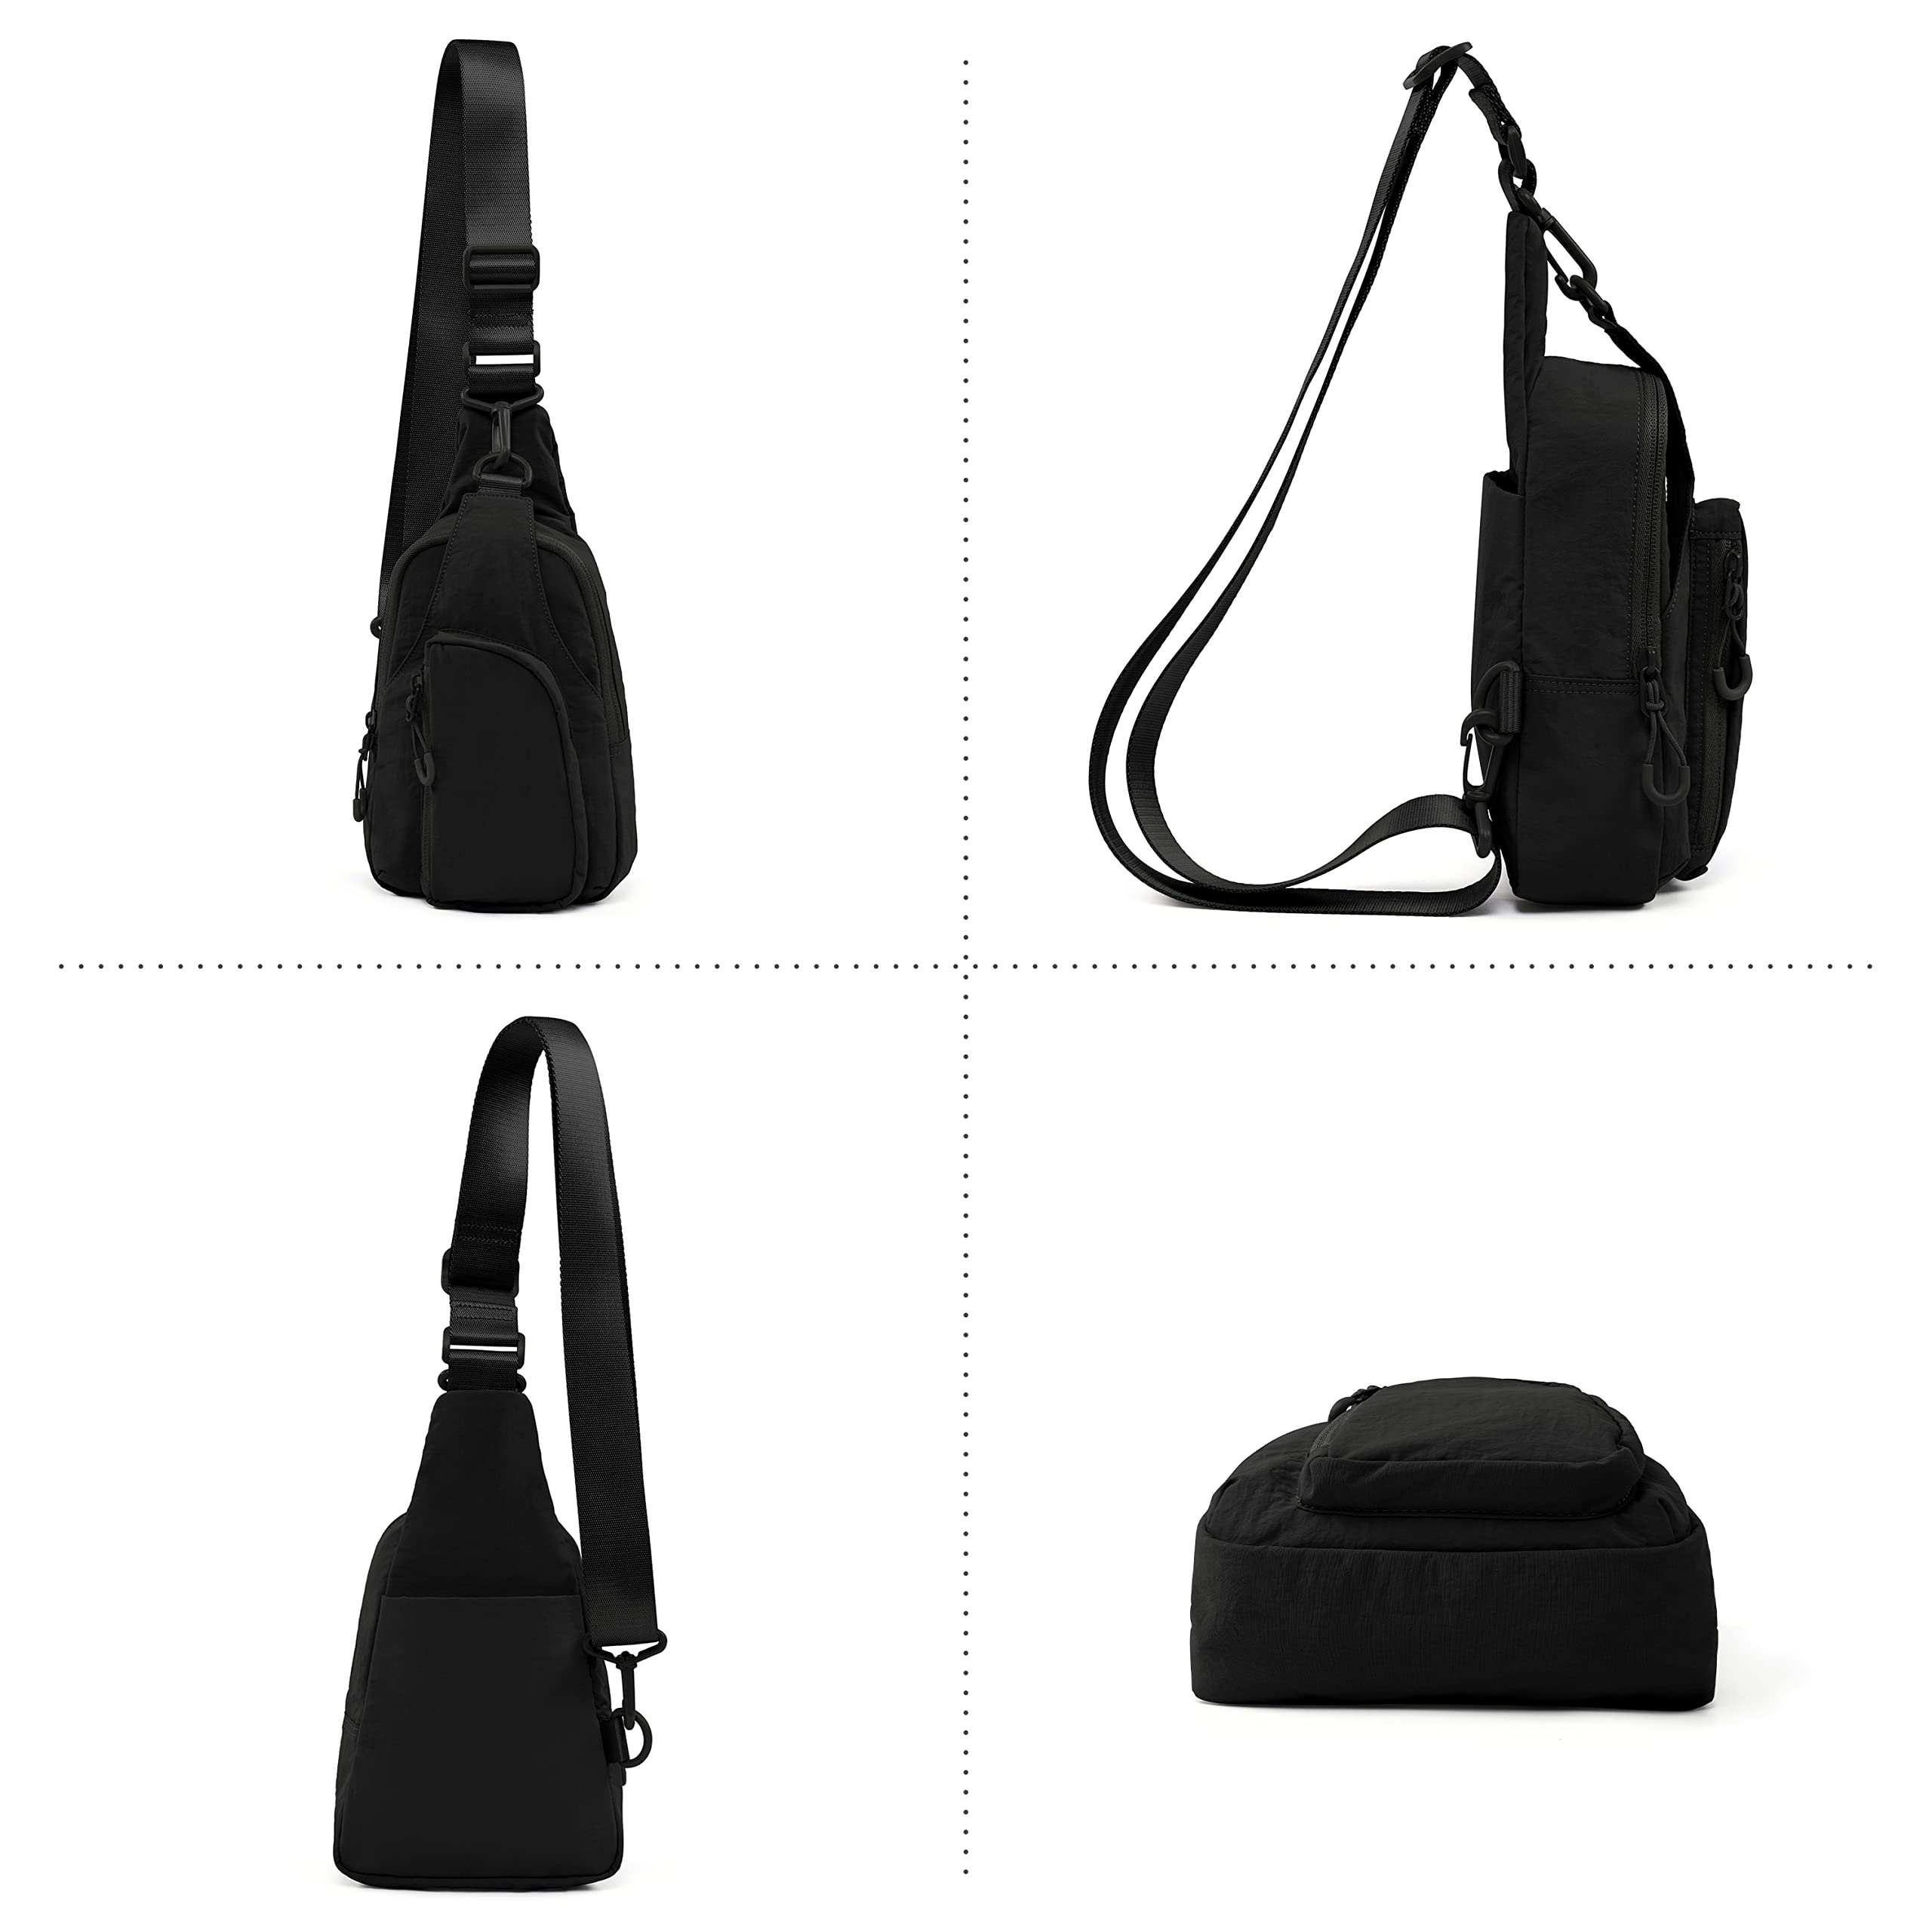 ODODOS Daily Sling Bag with Adjustable Straps Crossbody Chest Bag Lightweight Small Backpack for Casual Traveling Hiking